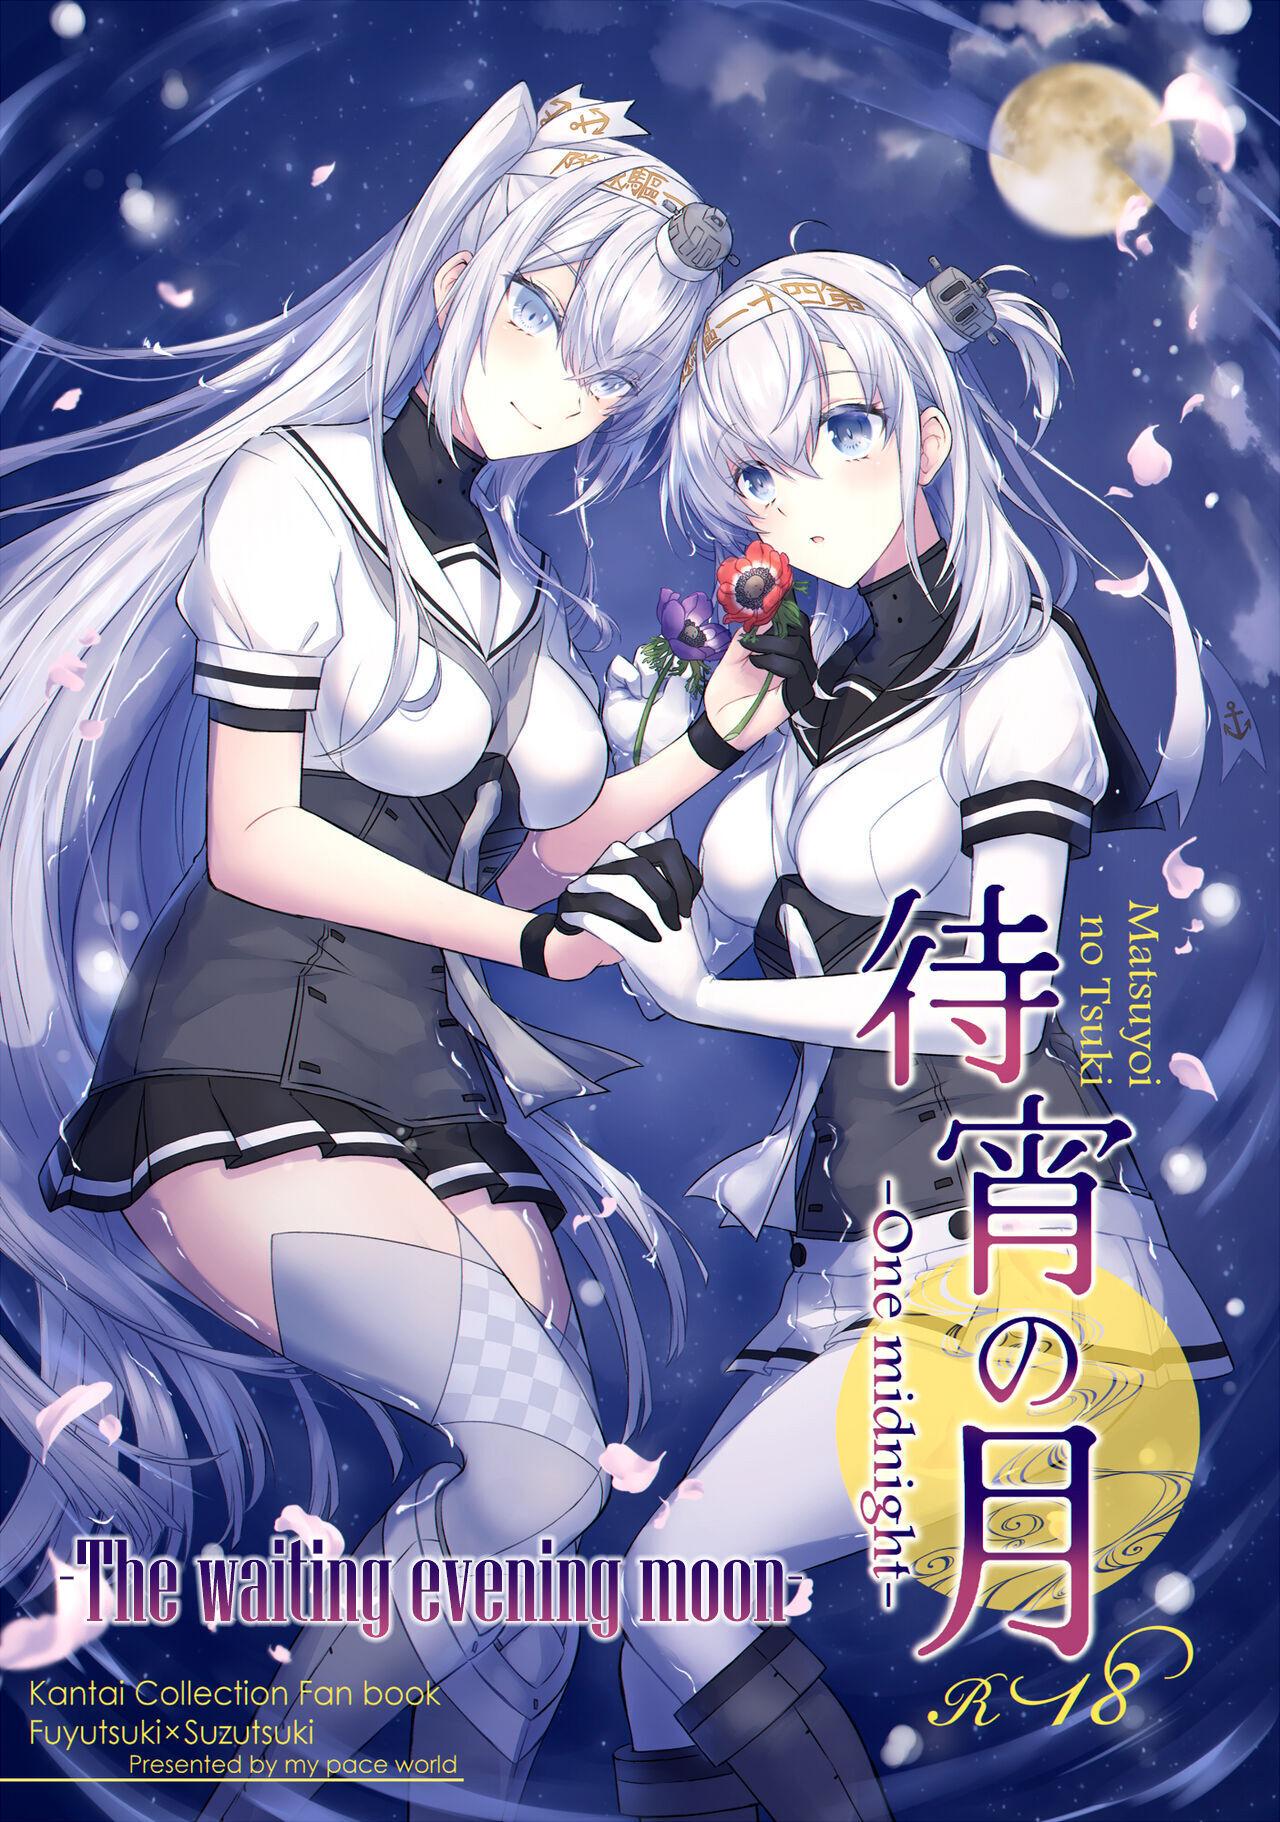 Dicksucking [my pace world (Kabocha Torte)] Matsuyoi no tsuki -One Midnight- | The waiting evening moon -One Midnight- (Kantai Collection -KanColle-) [English] [Digital] - Kantai collection Wet Cunts - Picture 1